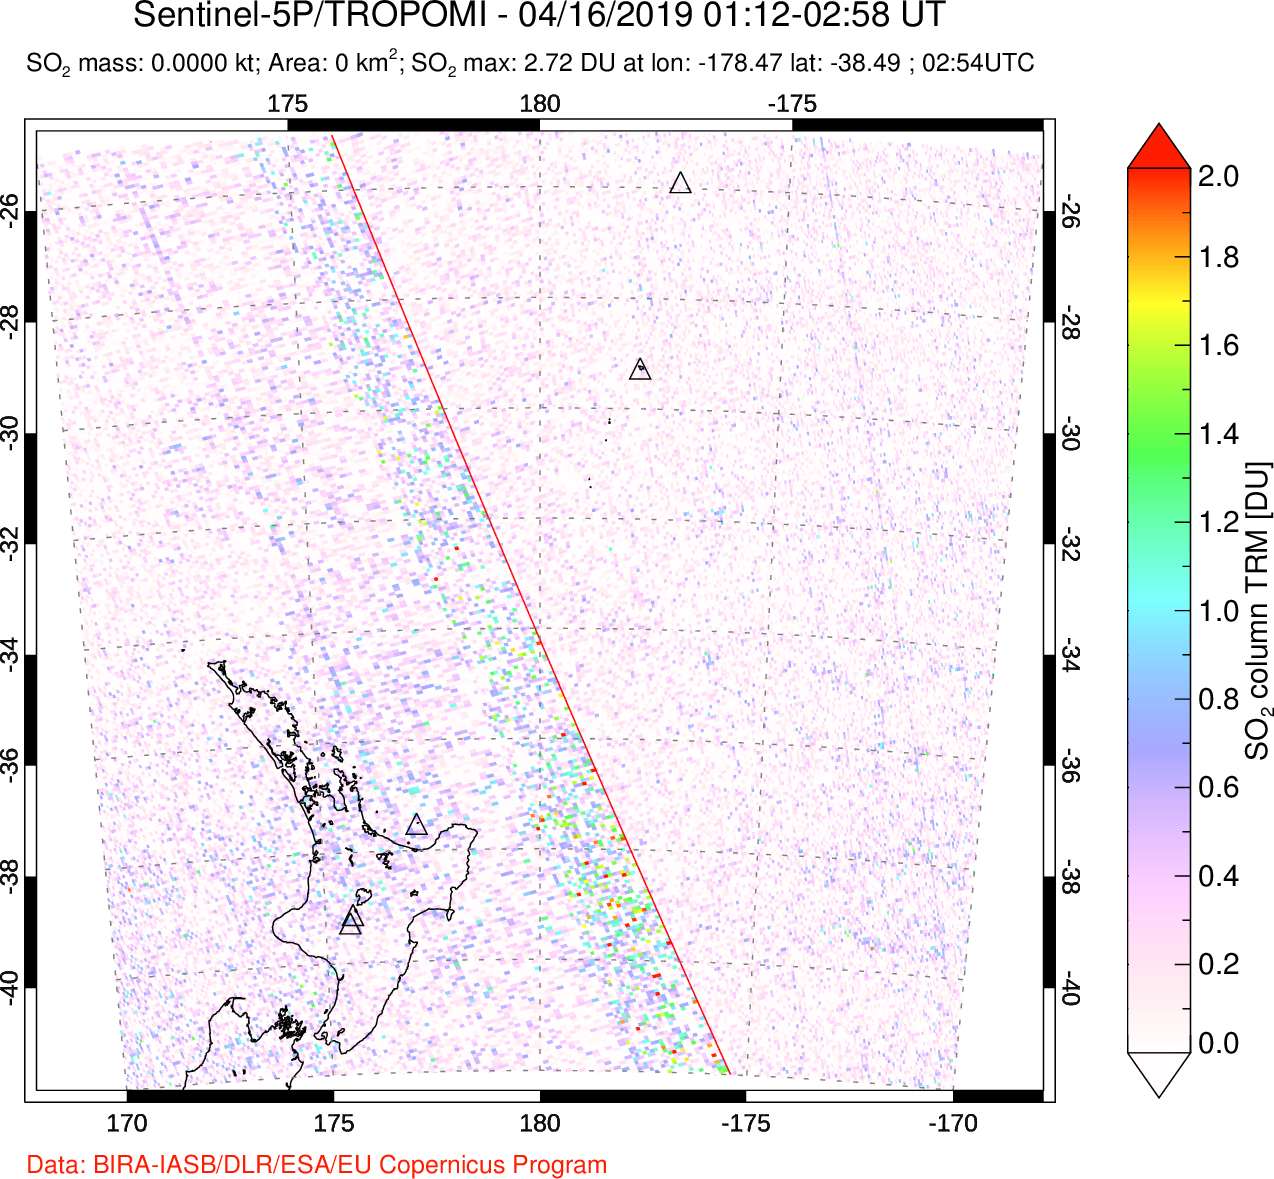 A sulfur dioxide image over New Zealand on Apr 16, 2019.